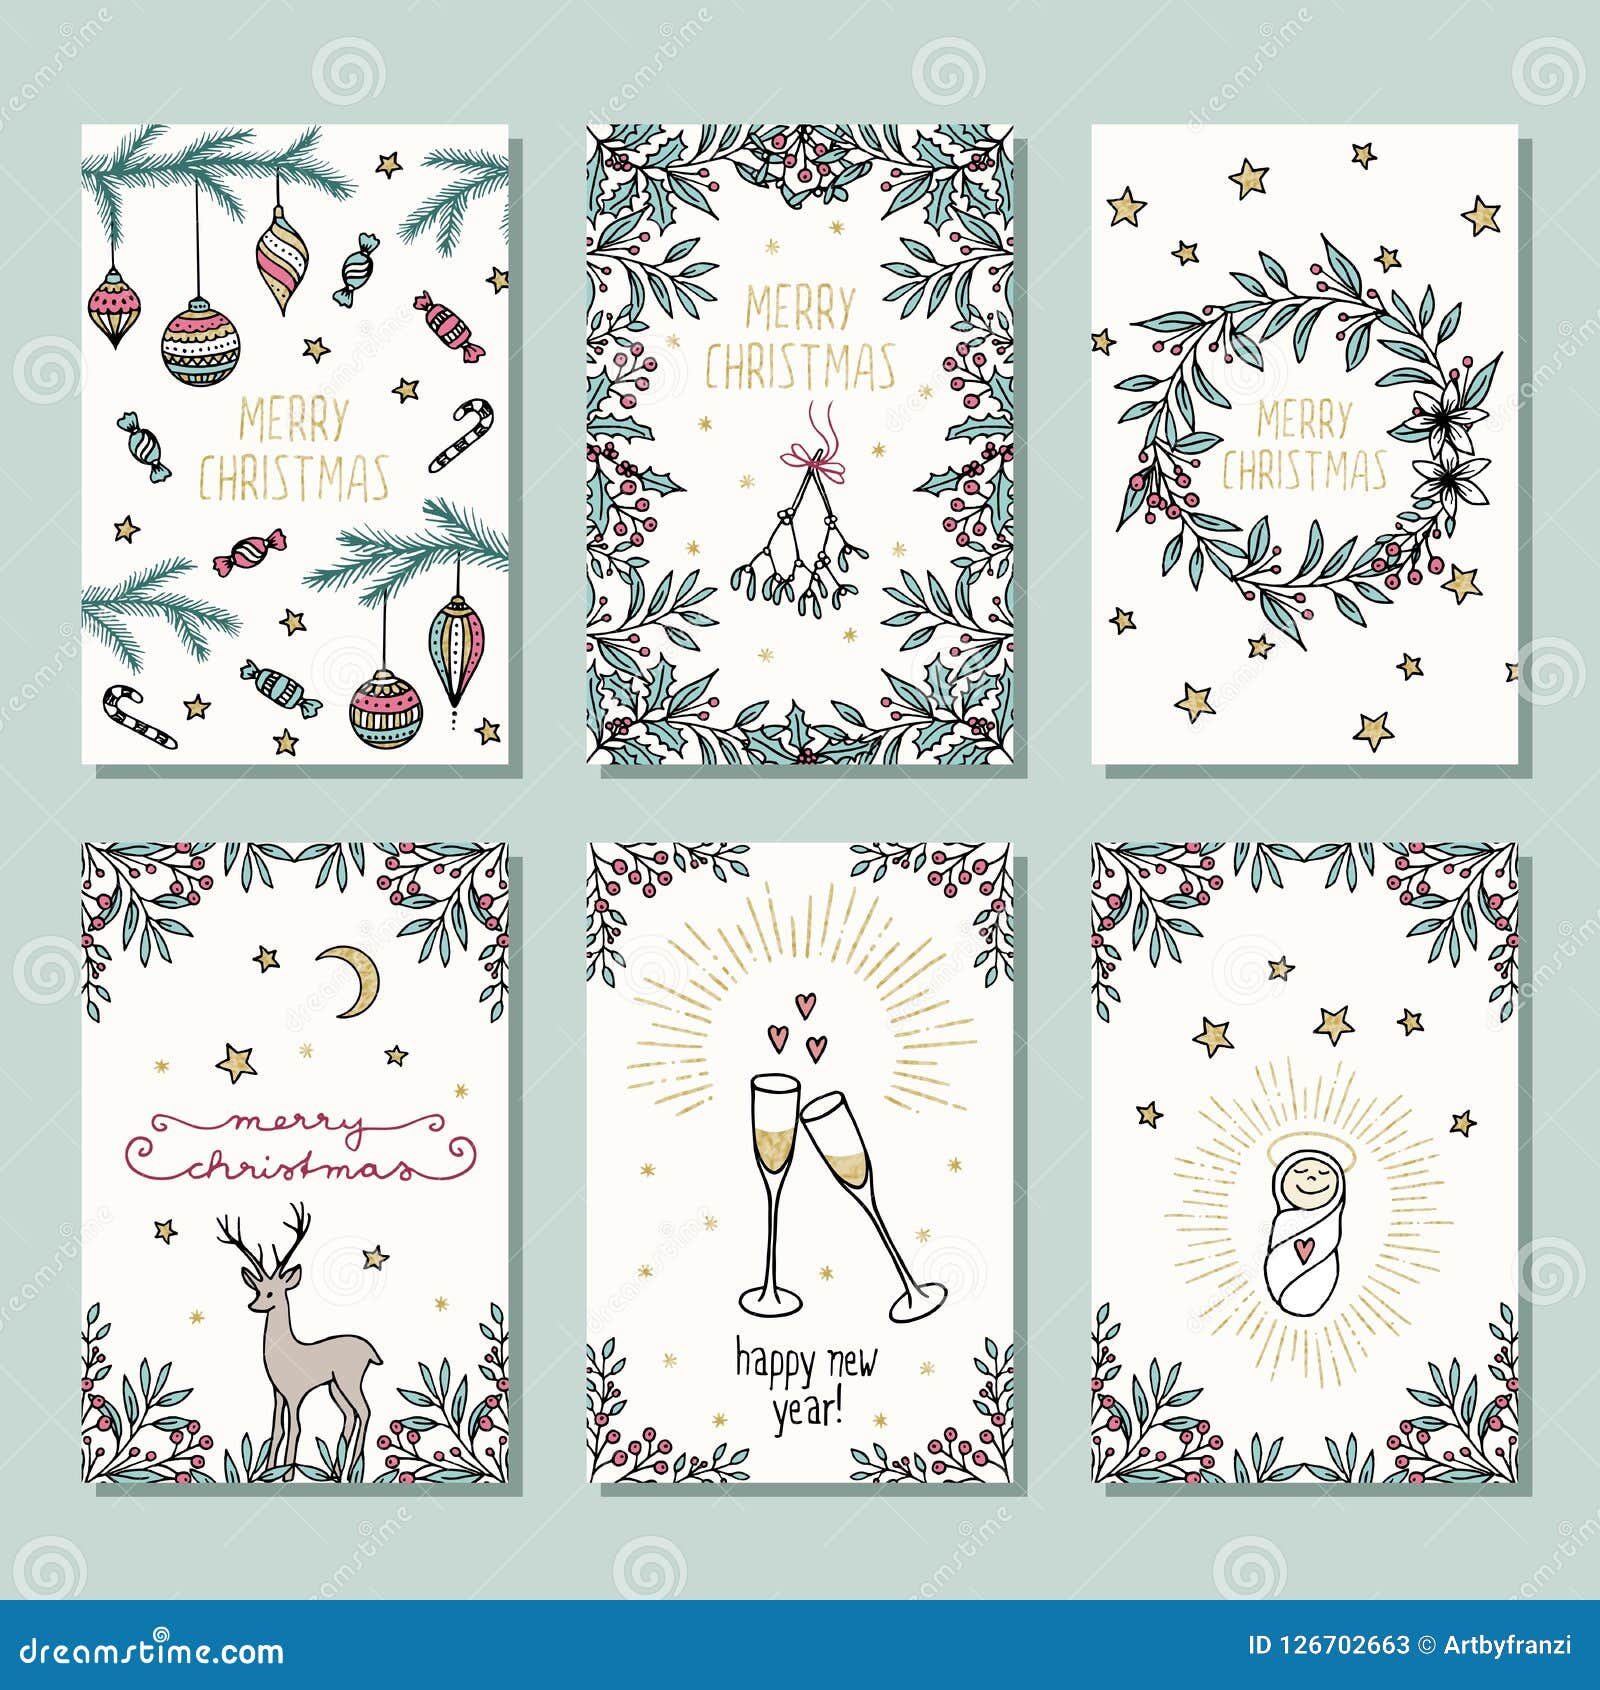 Set of six colorful Christmas cards